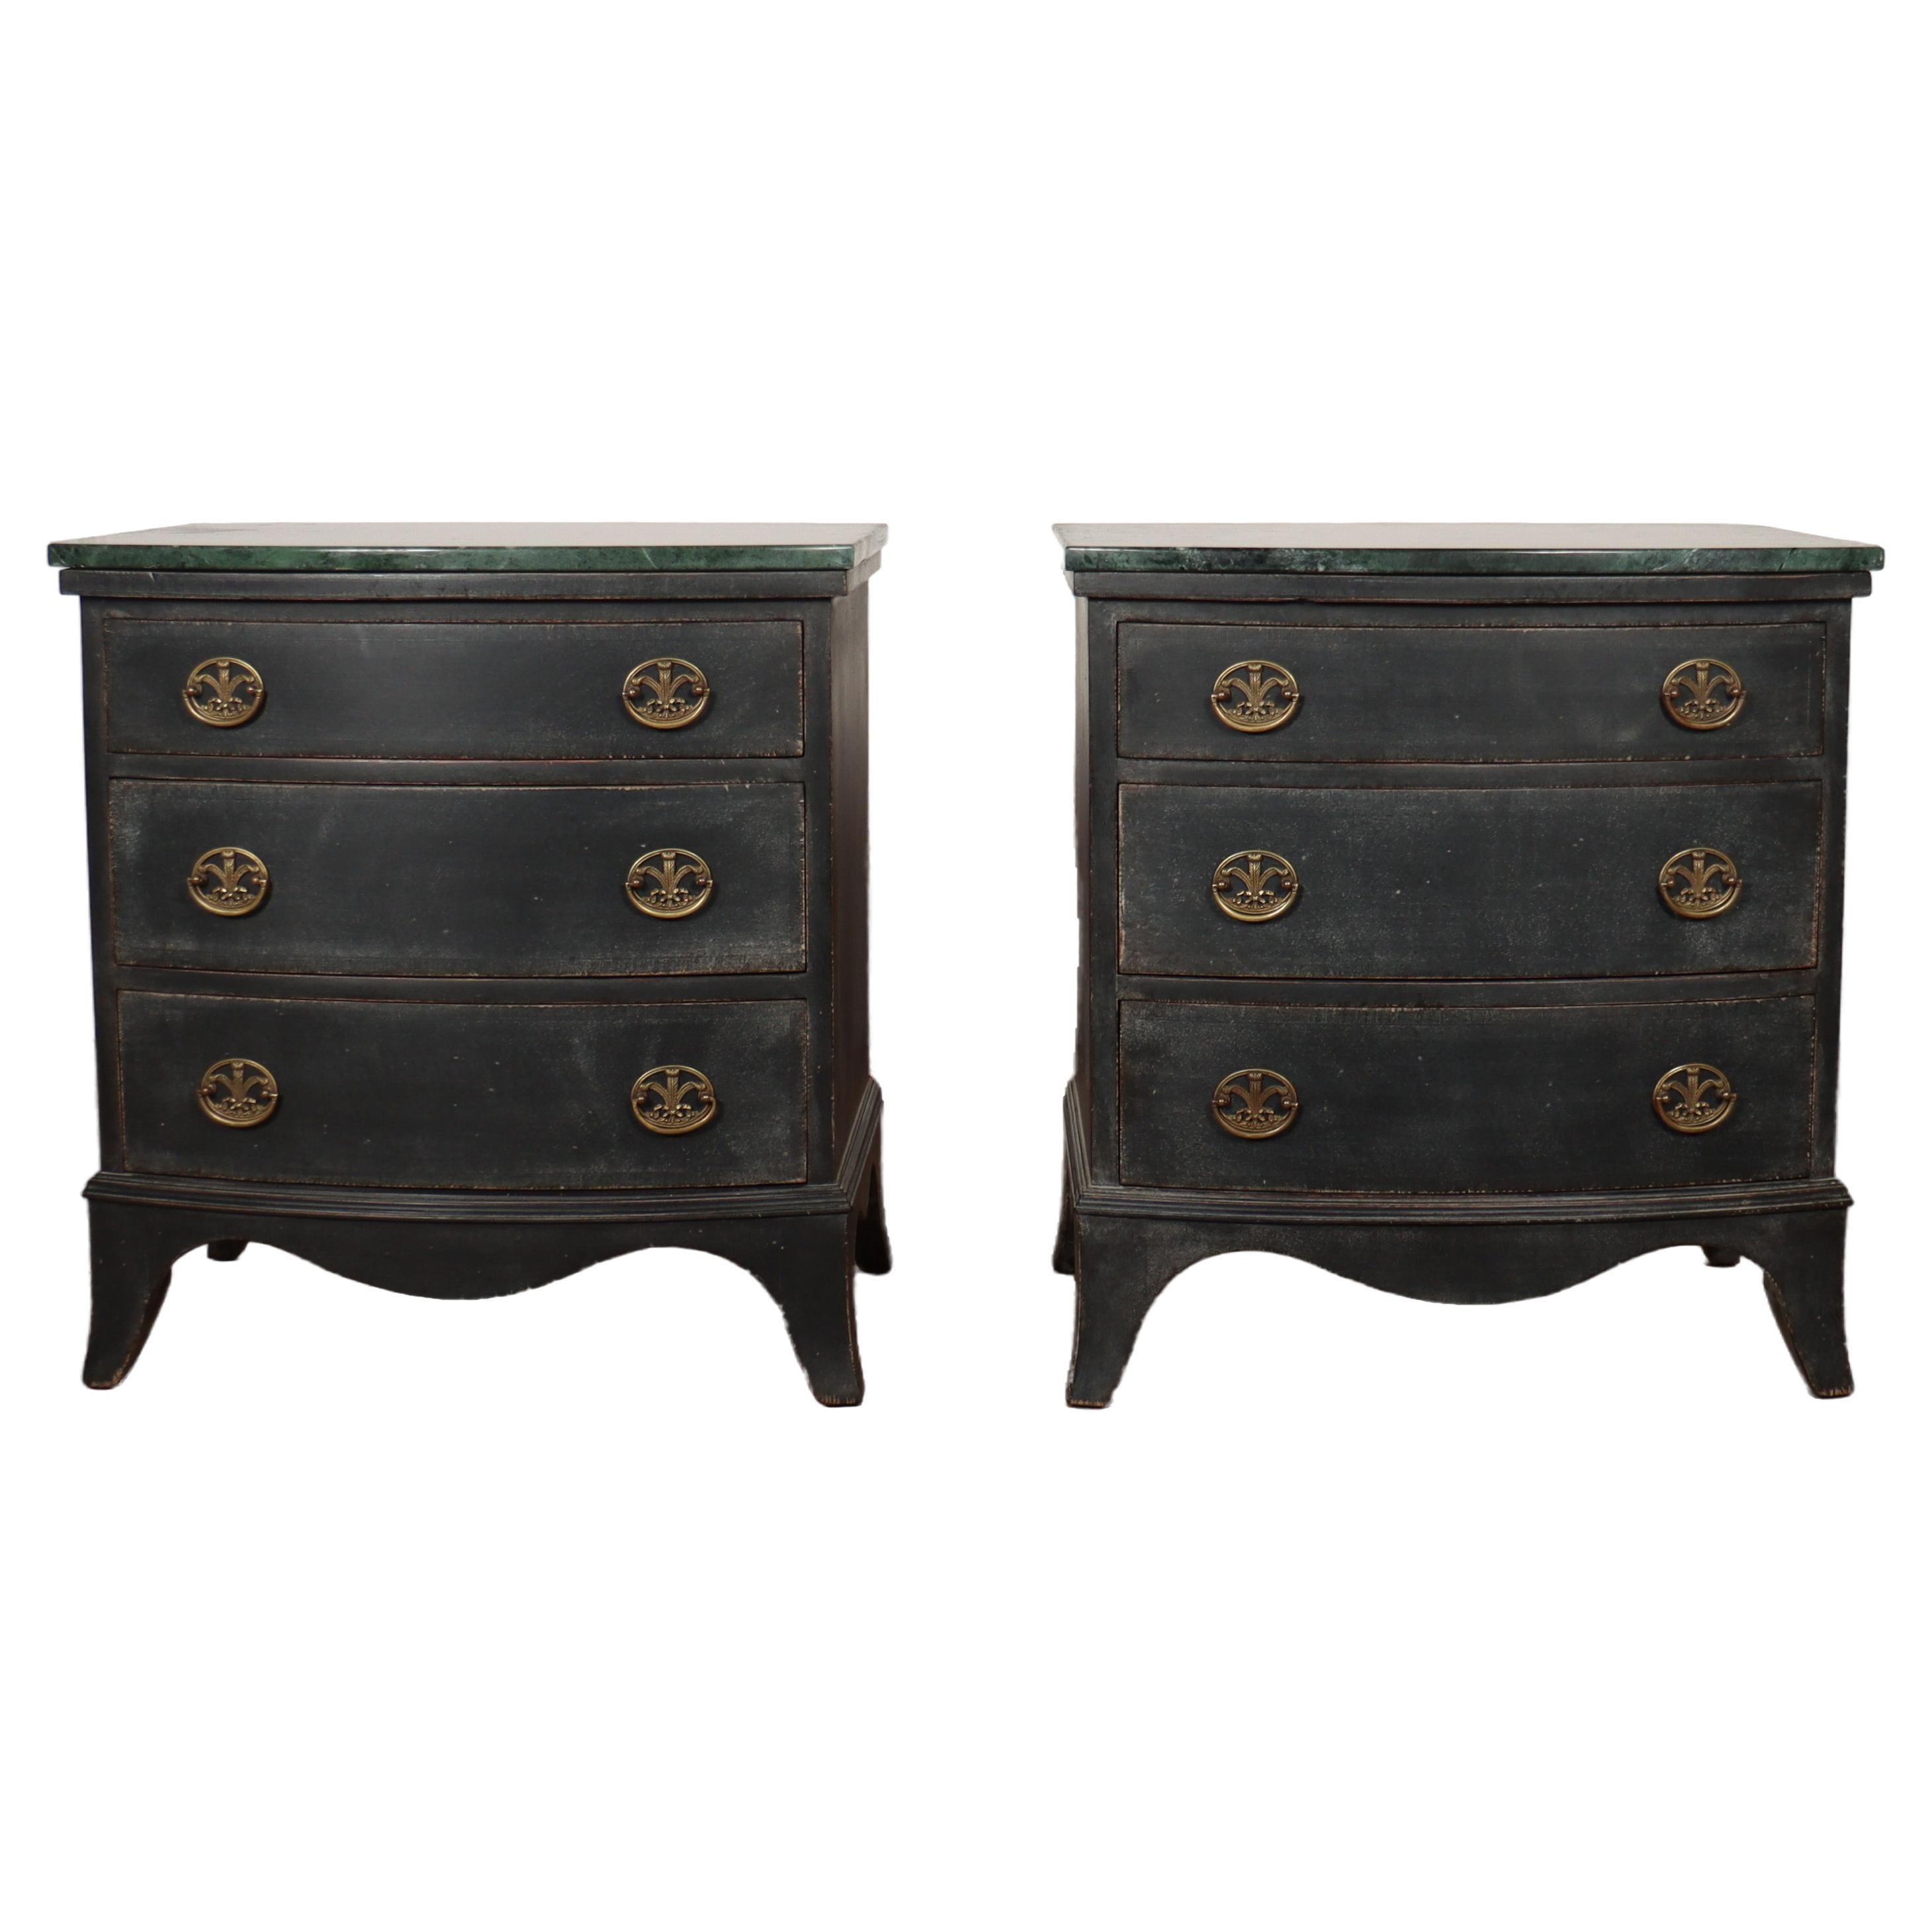 Pair of Painted Bedside Chest of Drawers